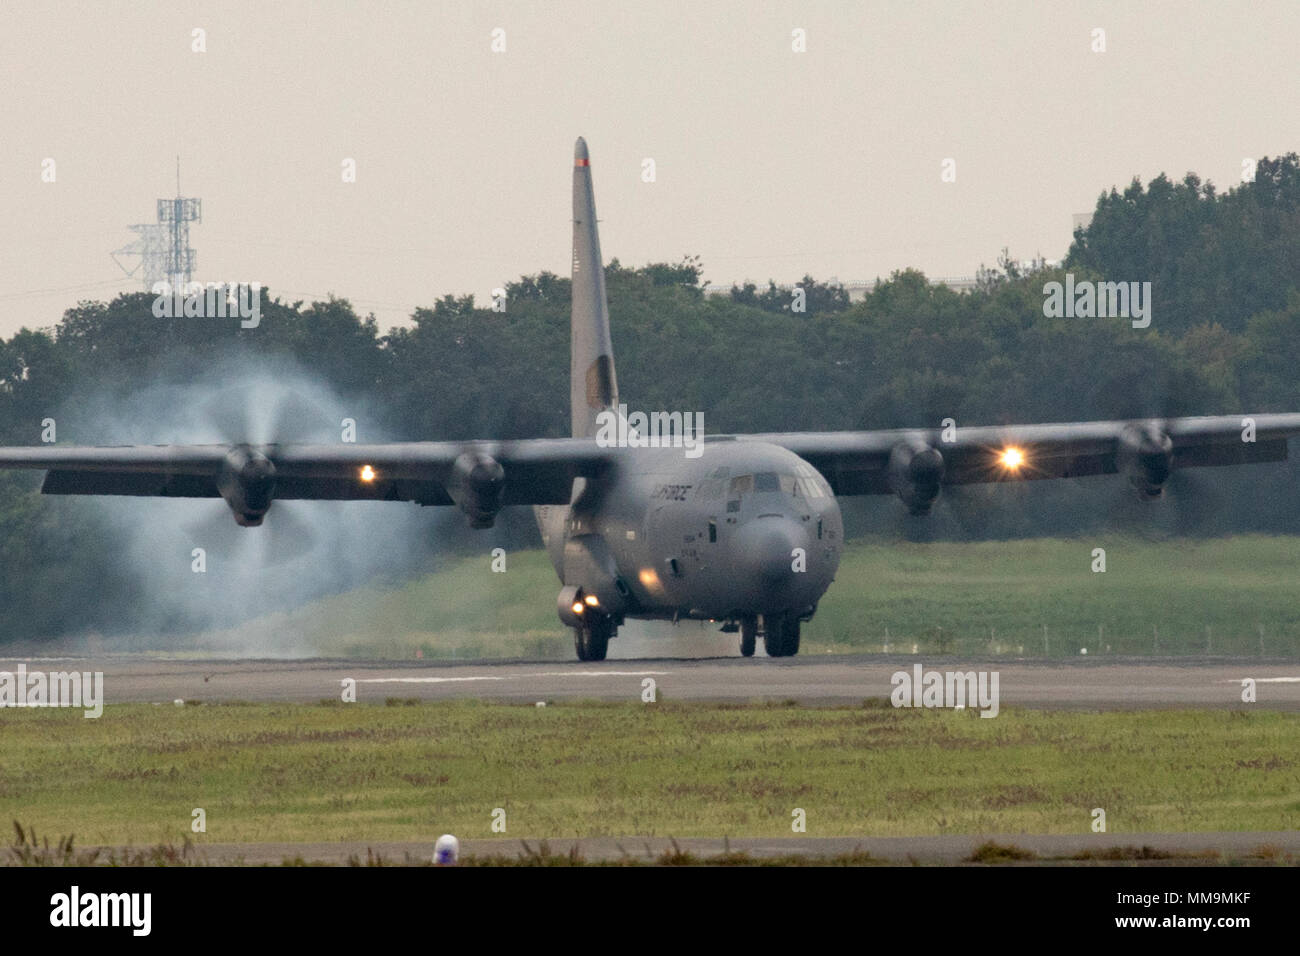 A C-130J Super Hercules touches down at Yokota Air Base, Japan, Sept. 20, 2017. This is the fifth C-130J delivered to Yokota and the first from Ramstein Air Base. Crewmembers from the 36th Airlift Squadron flew halfway around the world to deliver an aircraft here. Yokota serves as the primary Western Pacific airlift hub for U.S. Air Force peacetime and contingency operations. Missions include tactical airland, airdrop, aeromedical evacuation, special operations and distinguished visitor airlift. (U.S. Air Force photo by Yasuo Osakabe) Stock Photo